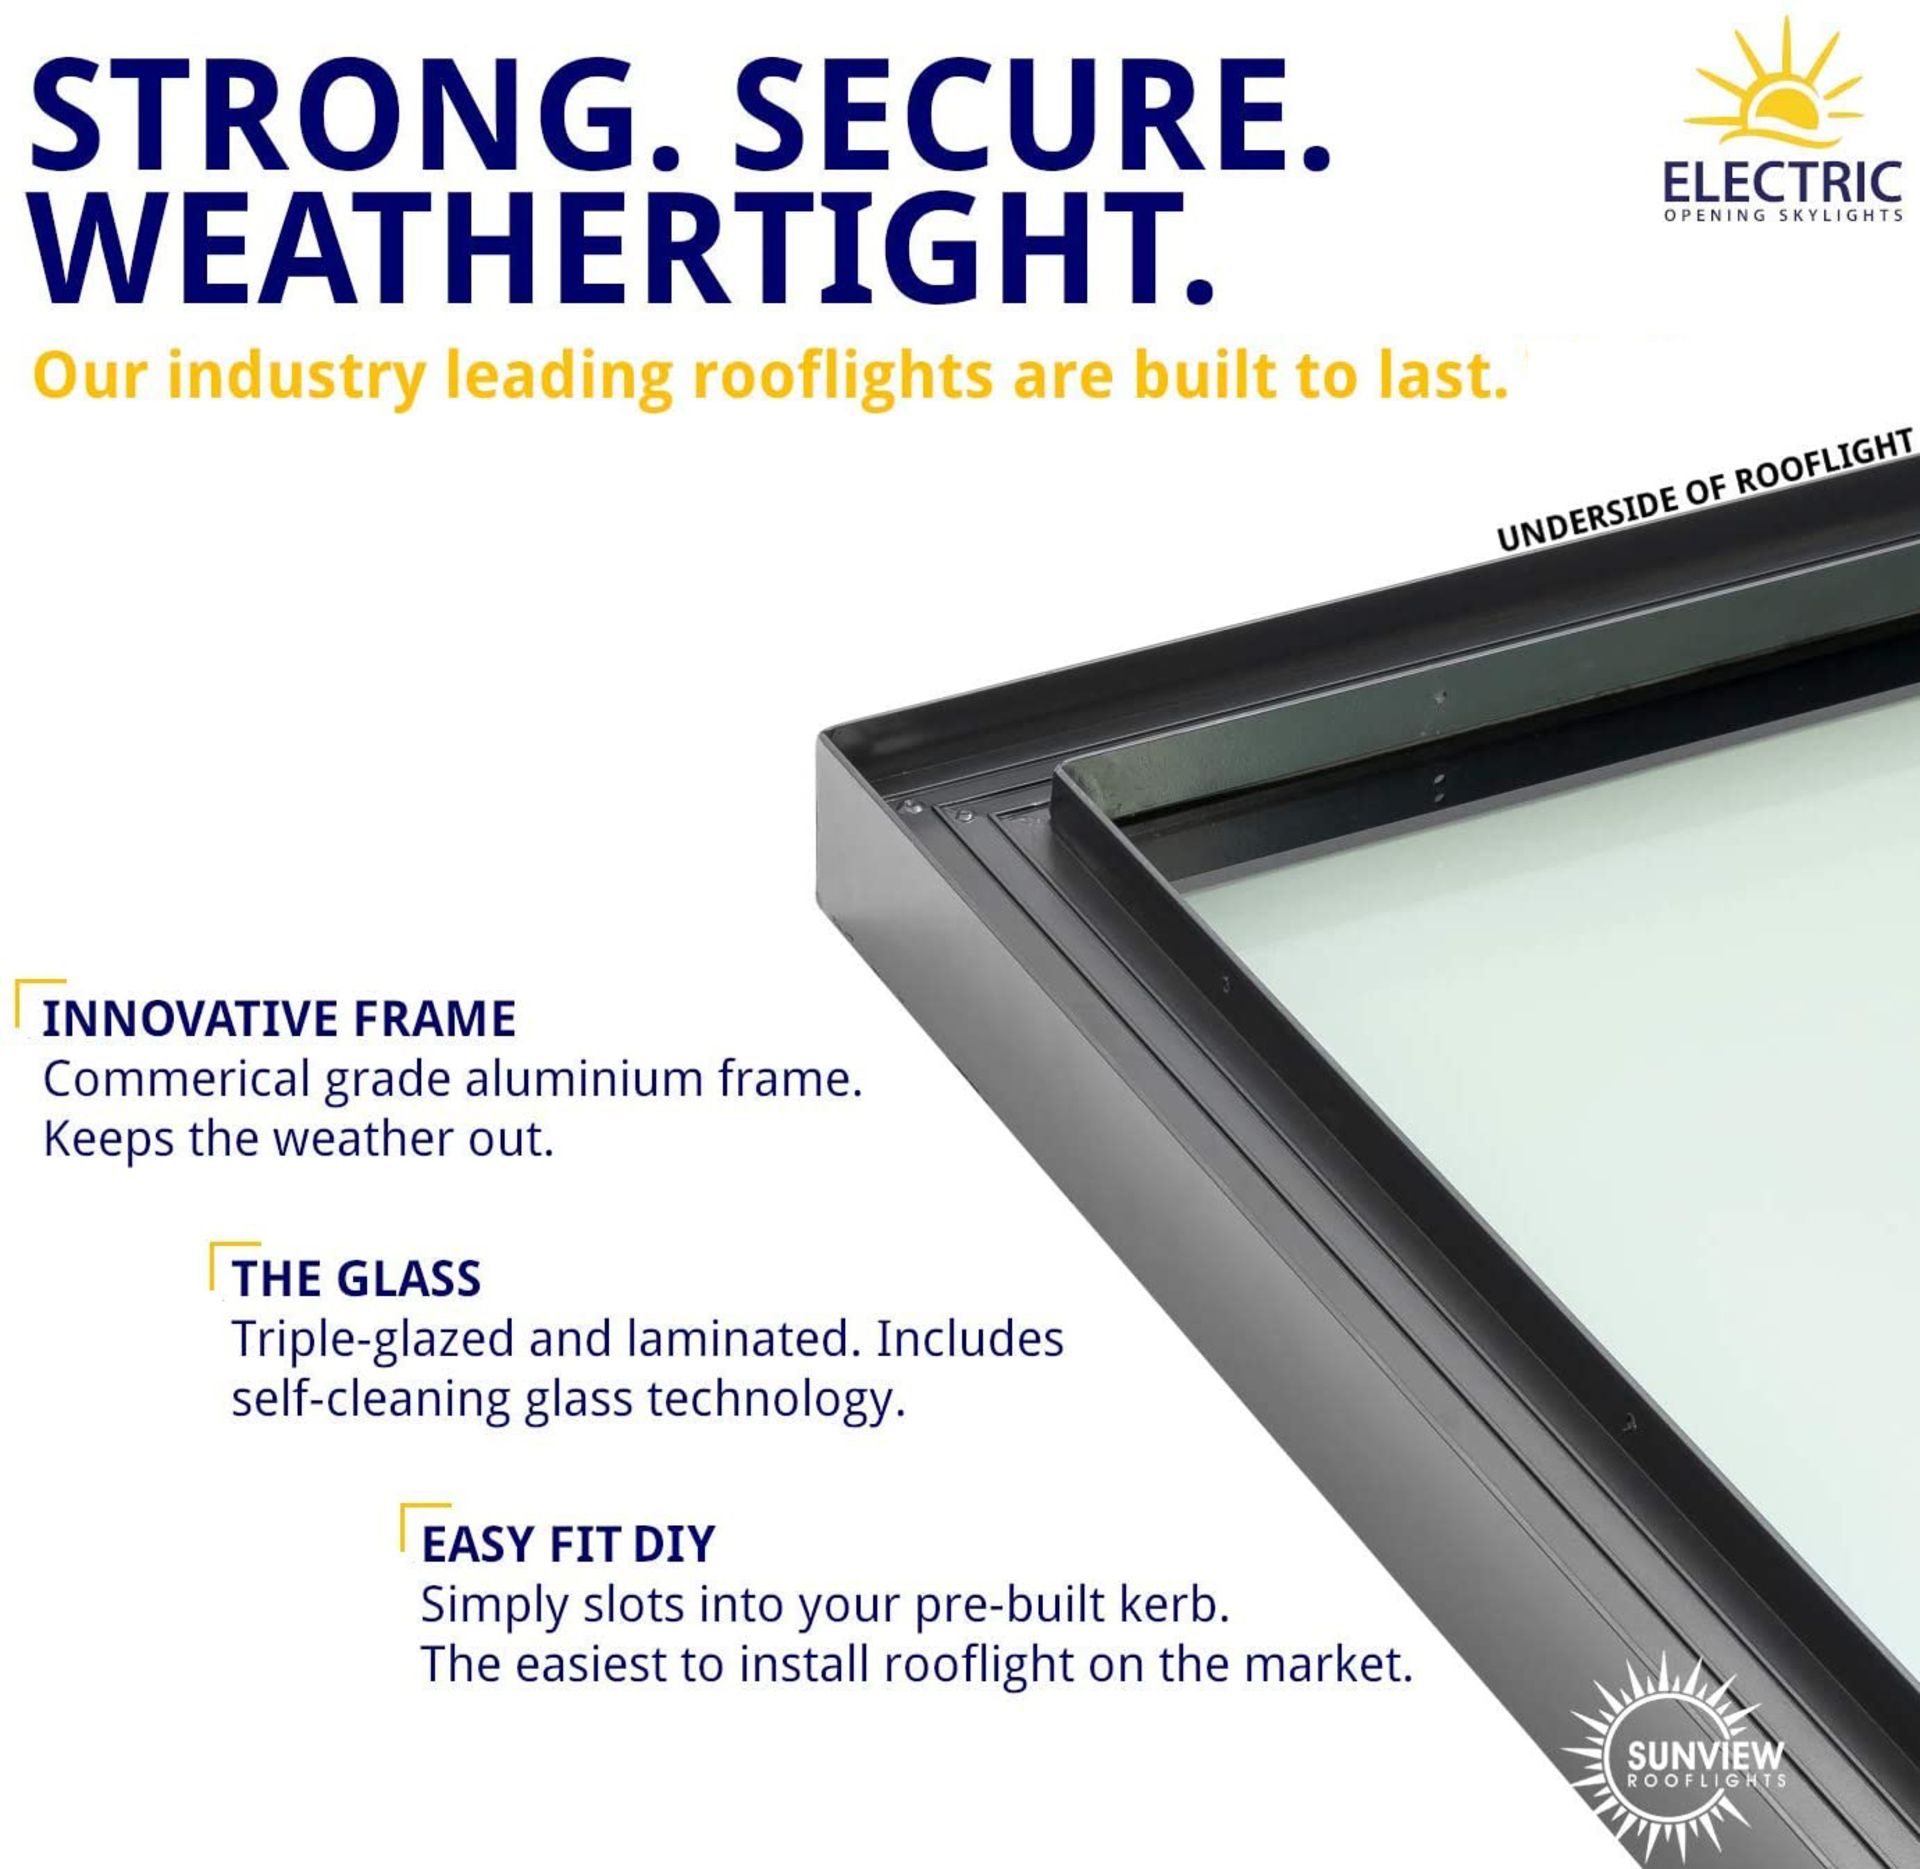 Panoroof (EOS) Fixed Aluminium Triple-Glazed Laminated Skylight with Self-Cleaning Glass - 600x900 - Image 2 of 6